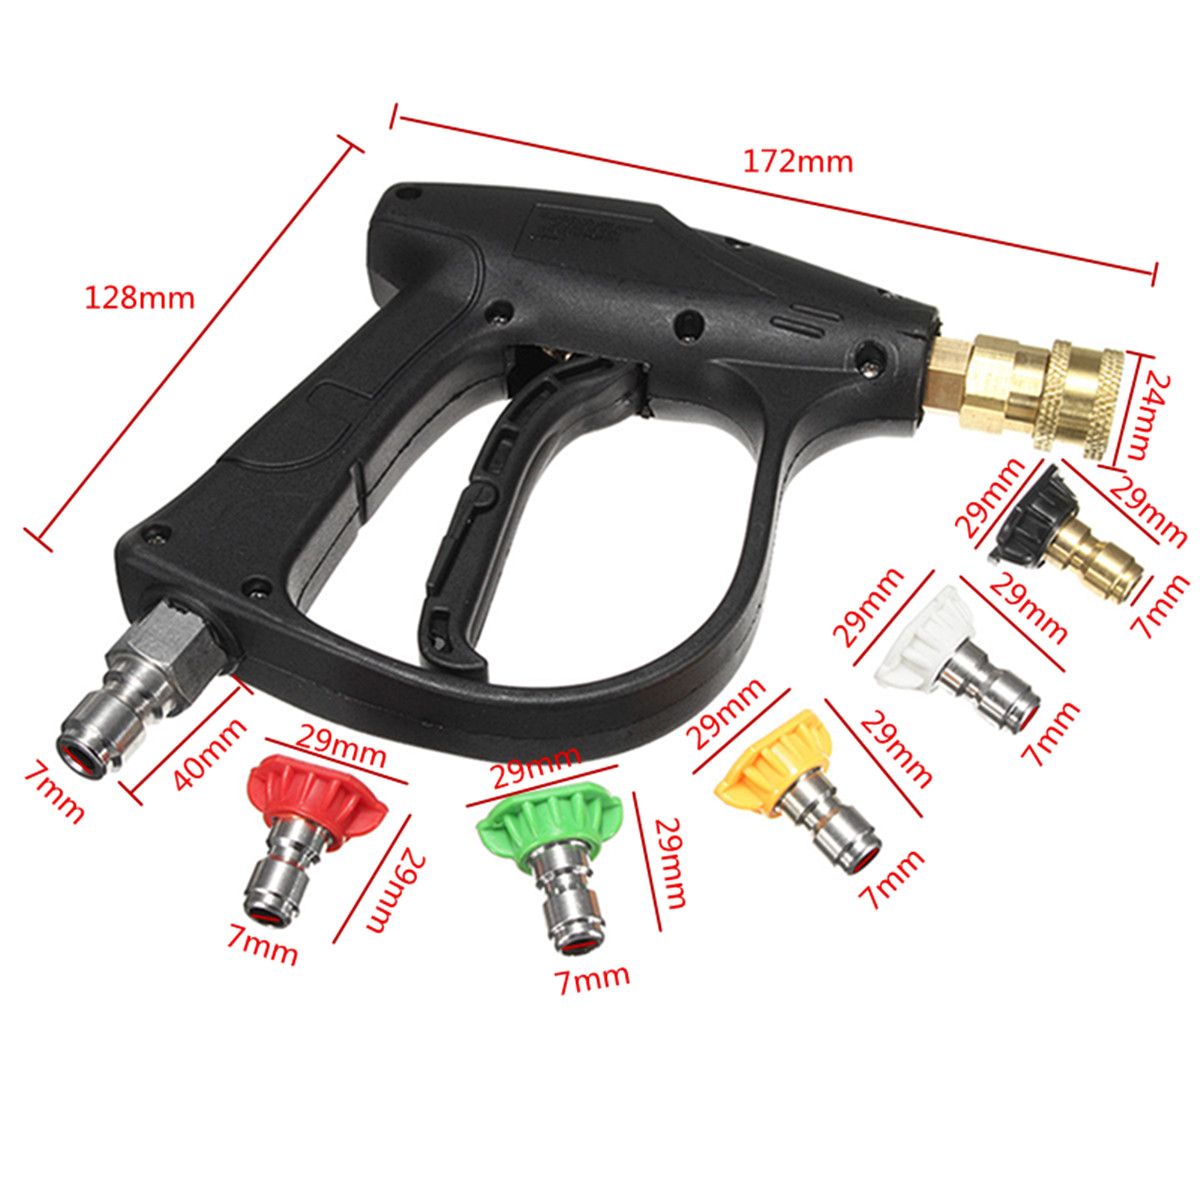 3000PSI-High-Pressure-Water-Gun-Adapter-With-5pcs-Nozzles-for-High-Pressure-Water-Cleaner-1130889-1